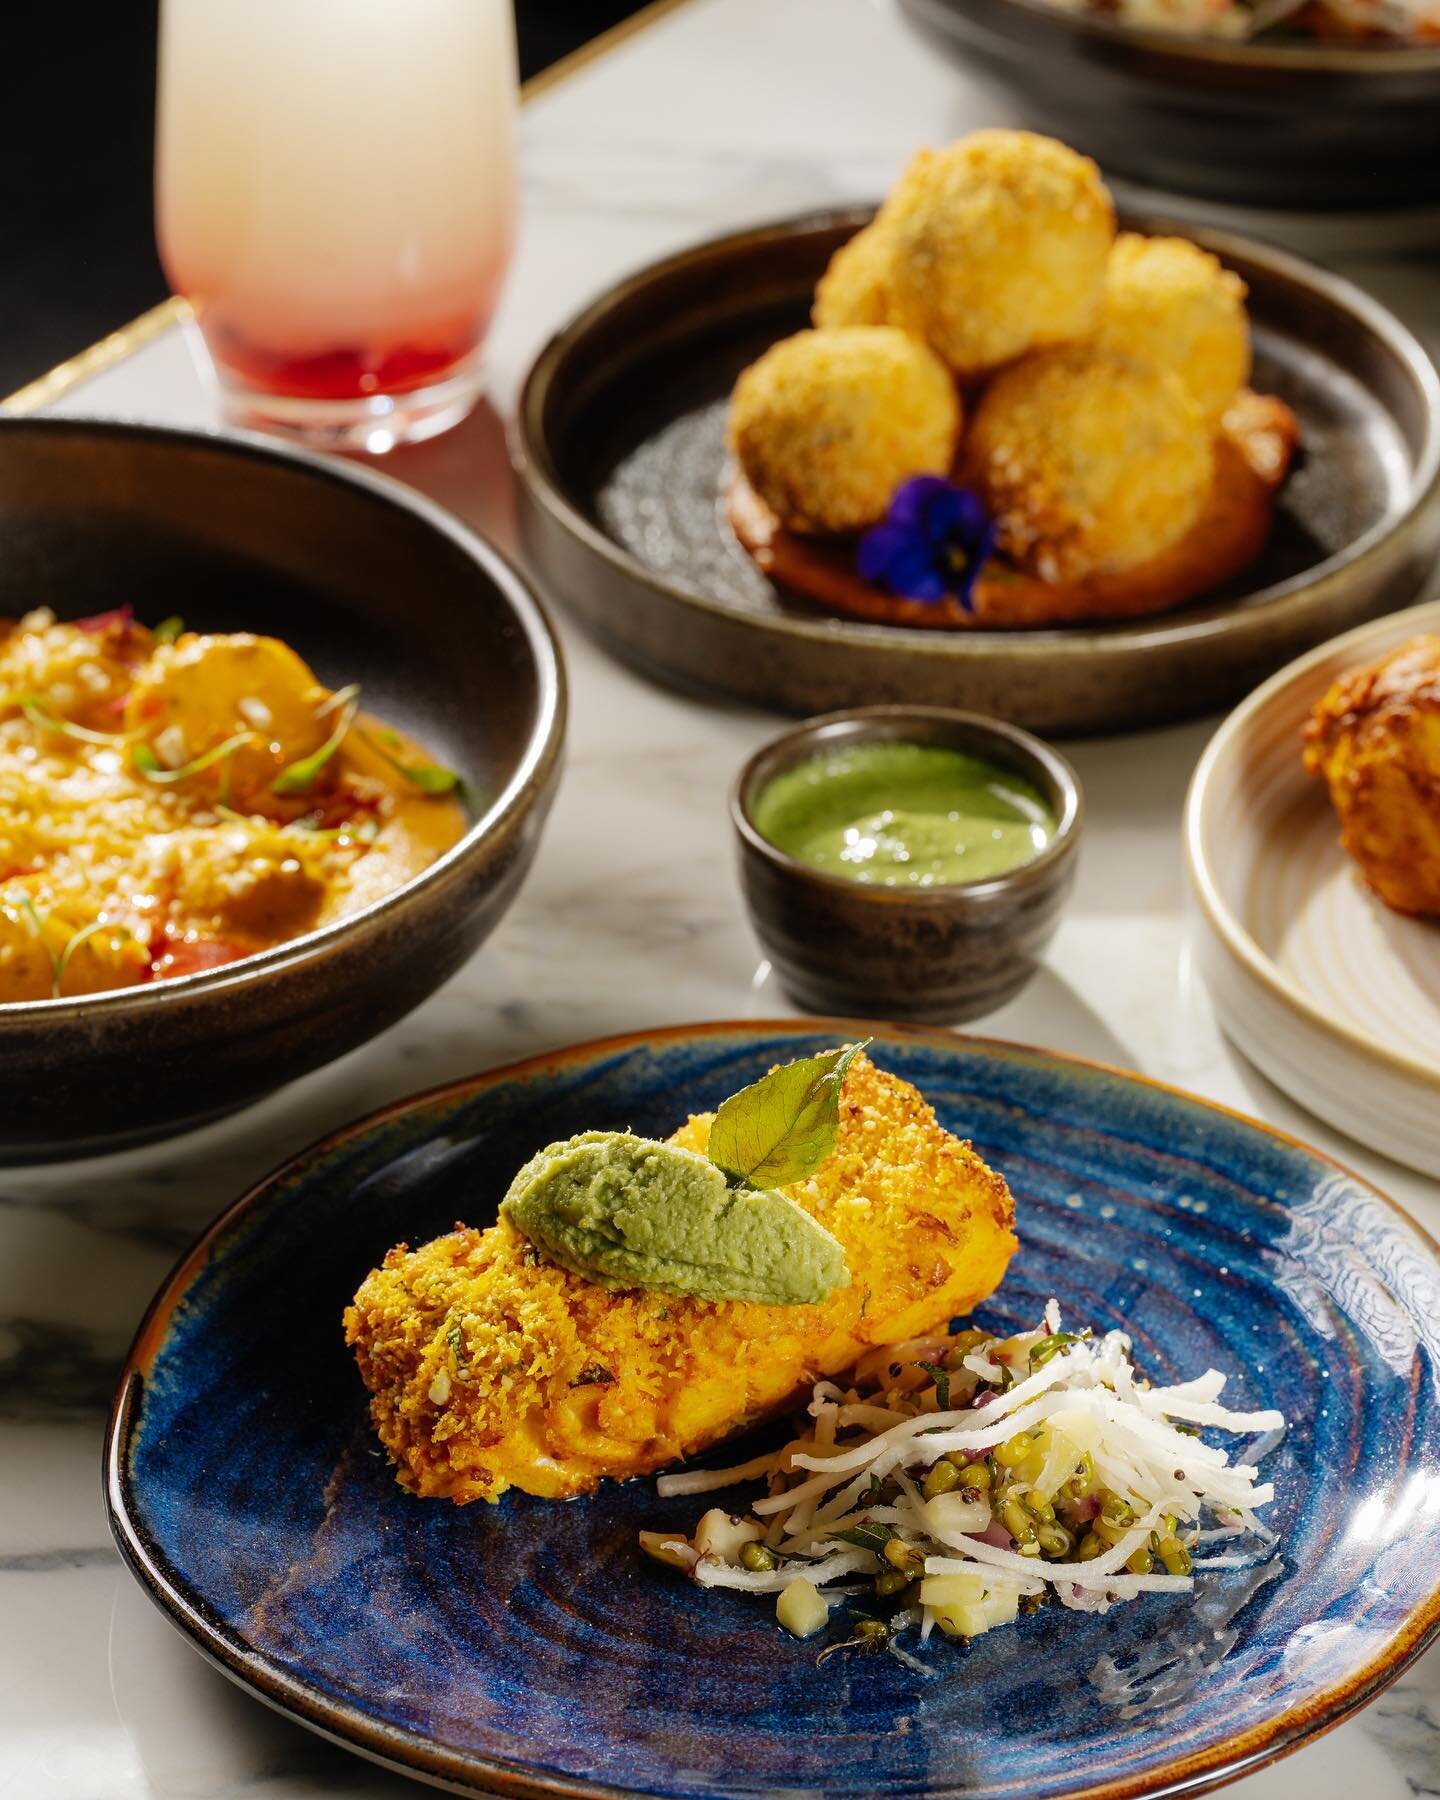 New Year, New Flavours. Come join us at Kama to try some of our new dishes this season.  @harrodsfood @chefvineet